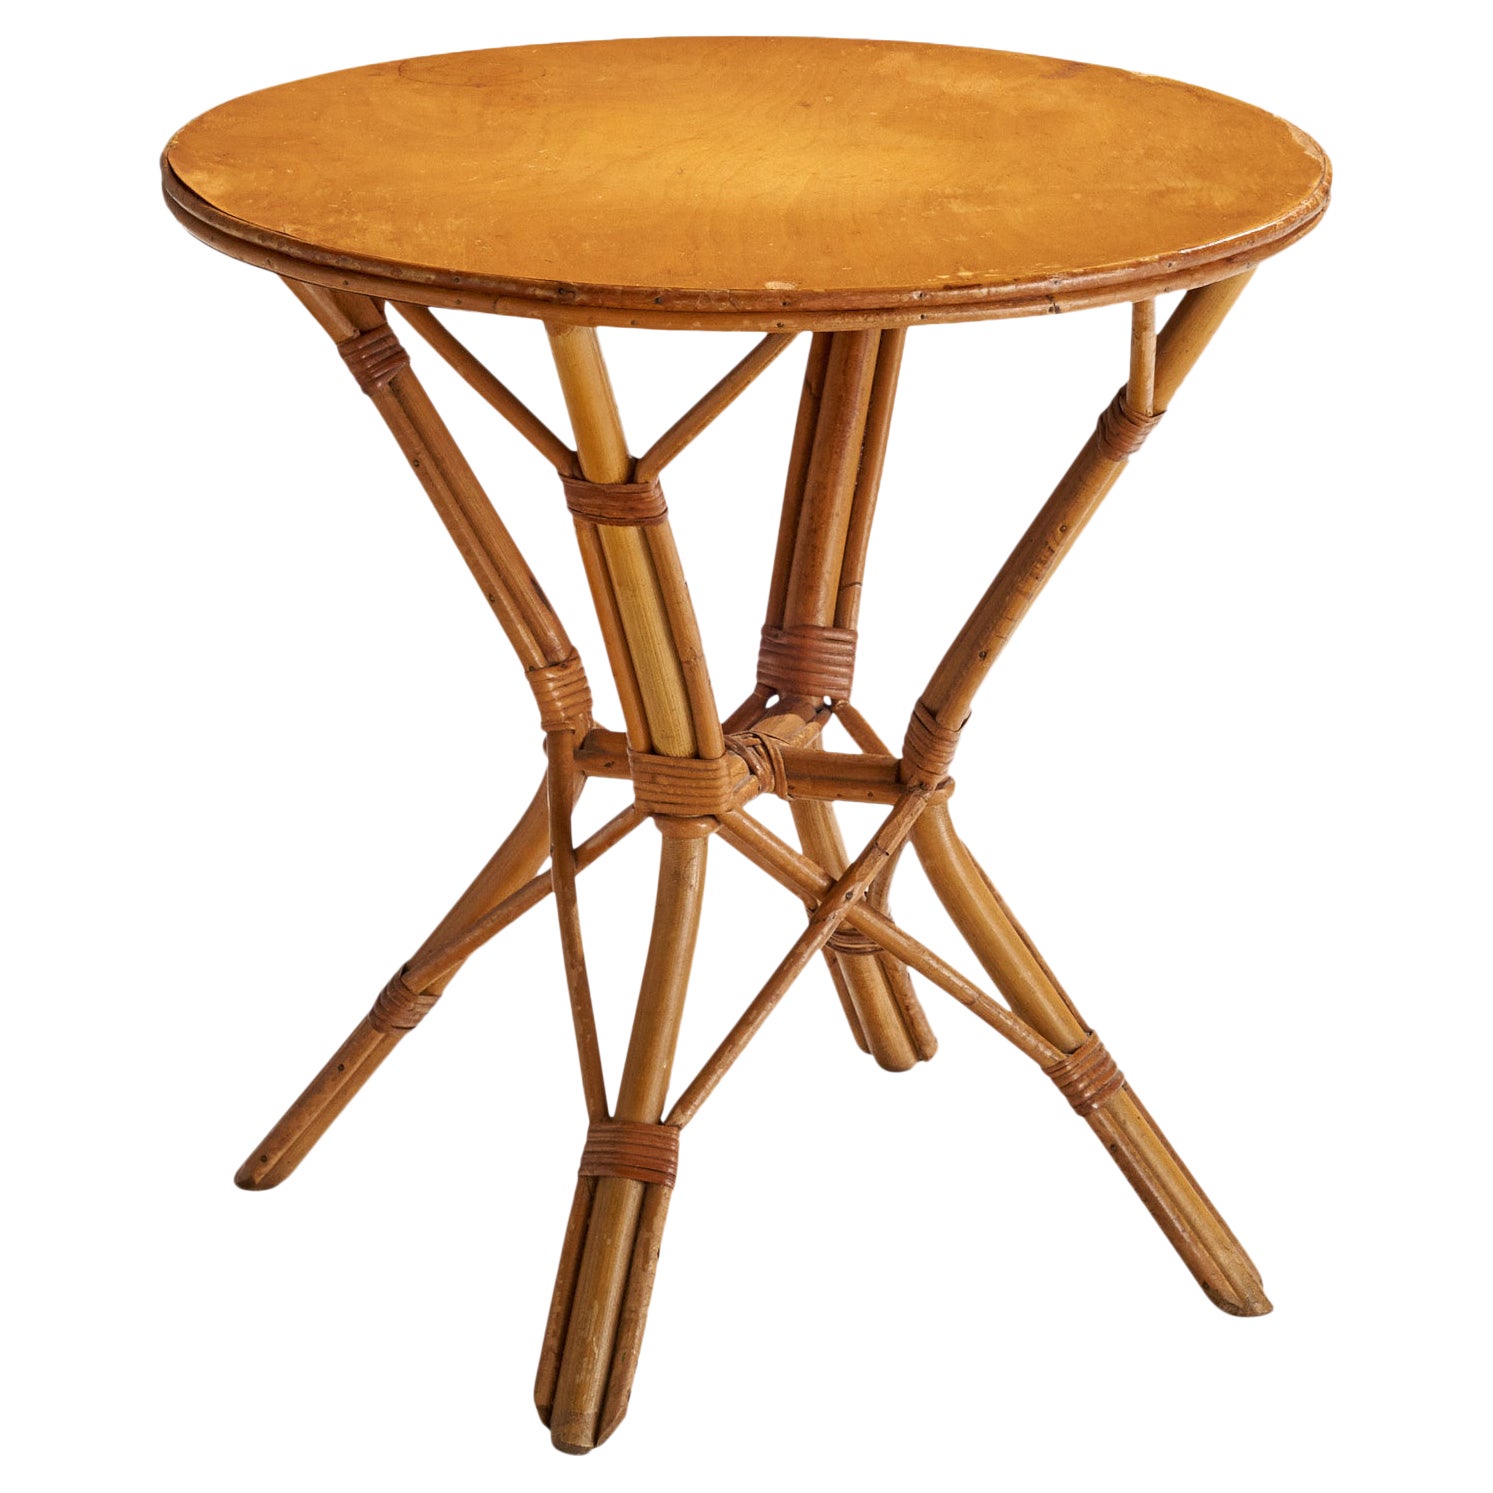 American Designer, Side Table, Bamboo, Rattan, Wood, USA, 1950s For Sale